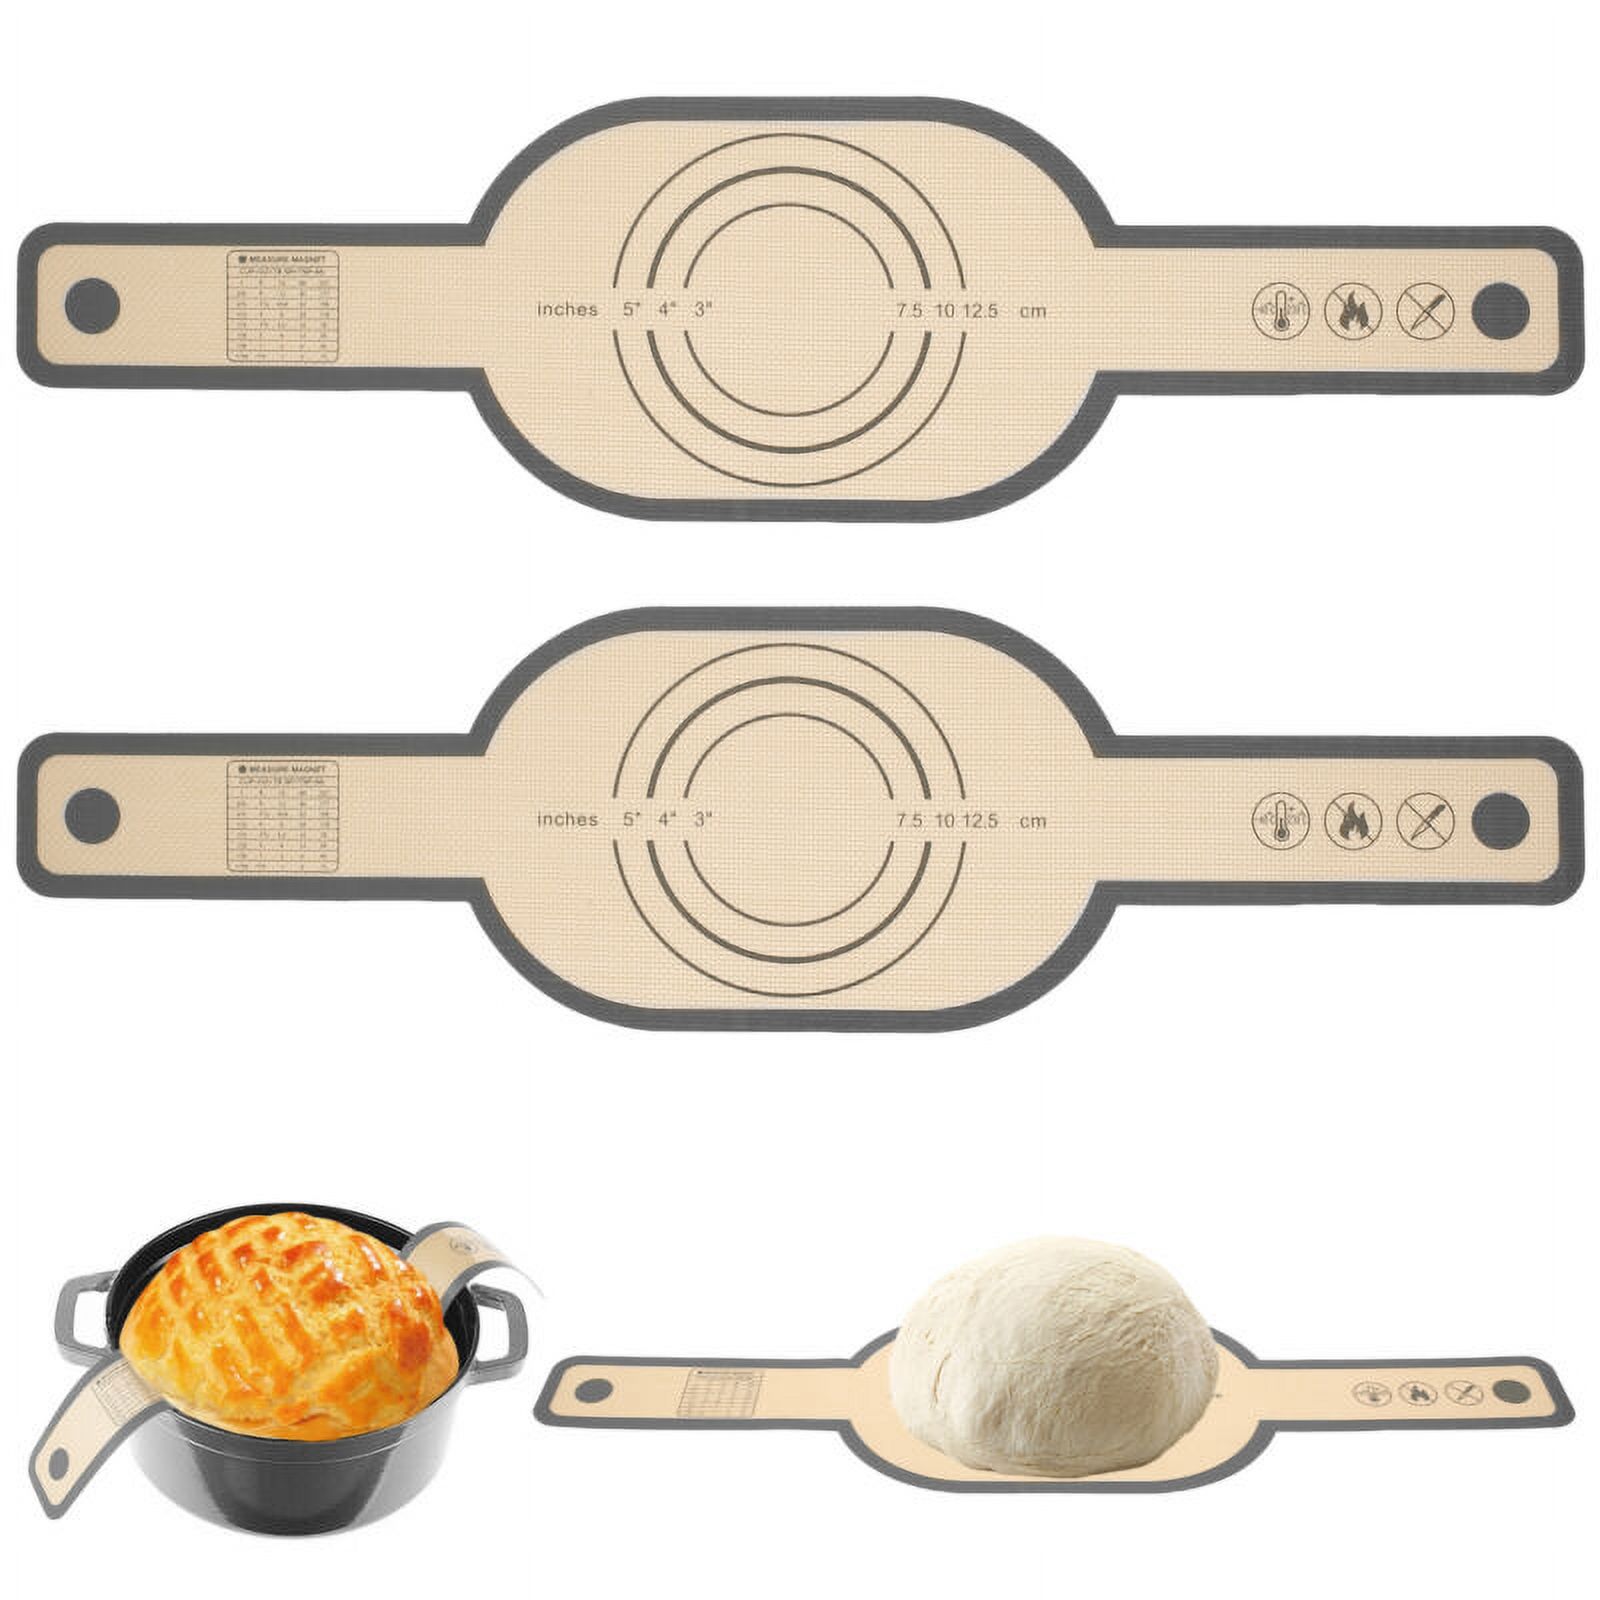 Qenwkxz 2pcs Silicone Bread Sling Non-Stick Silicone Baking Mat Sling Heat Resistant Silicone Dutch Oven Liner with Long Handle Reusable Silicone Bread Mat Sheets for Transfer Dough Baking - image 2 of 11